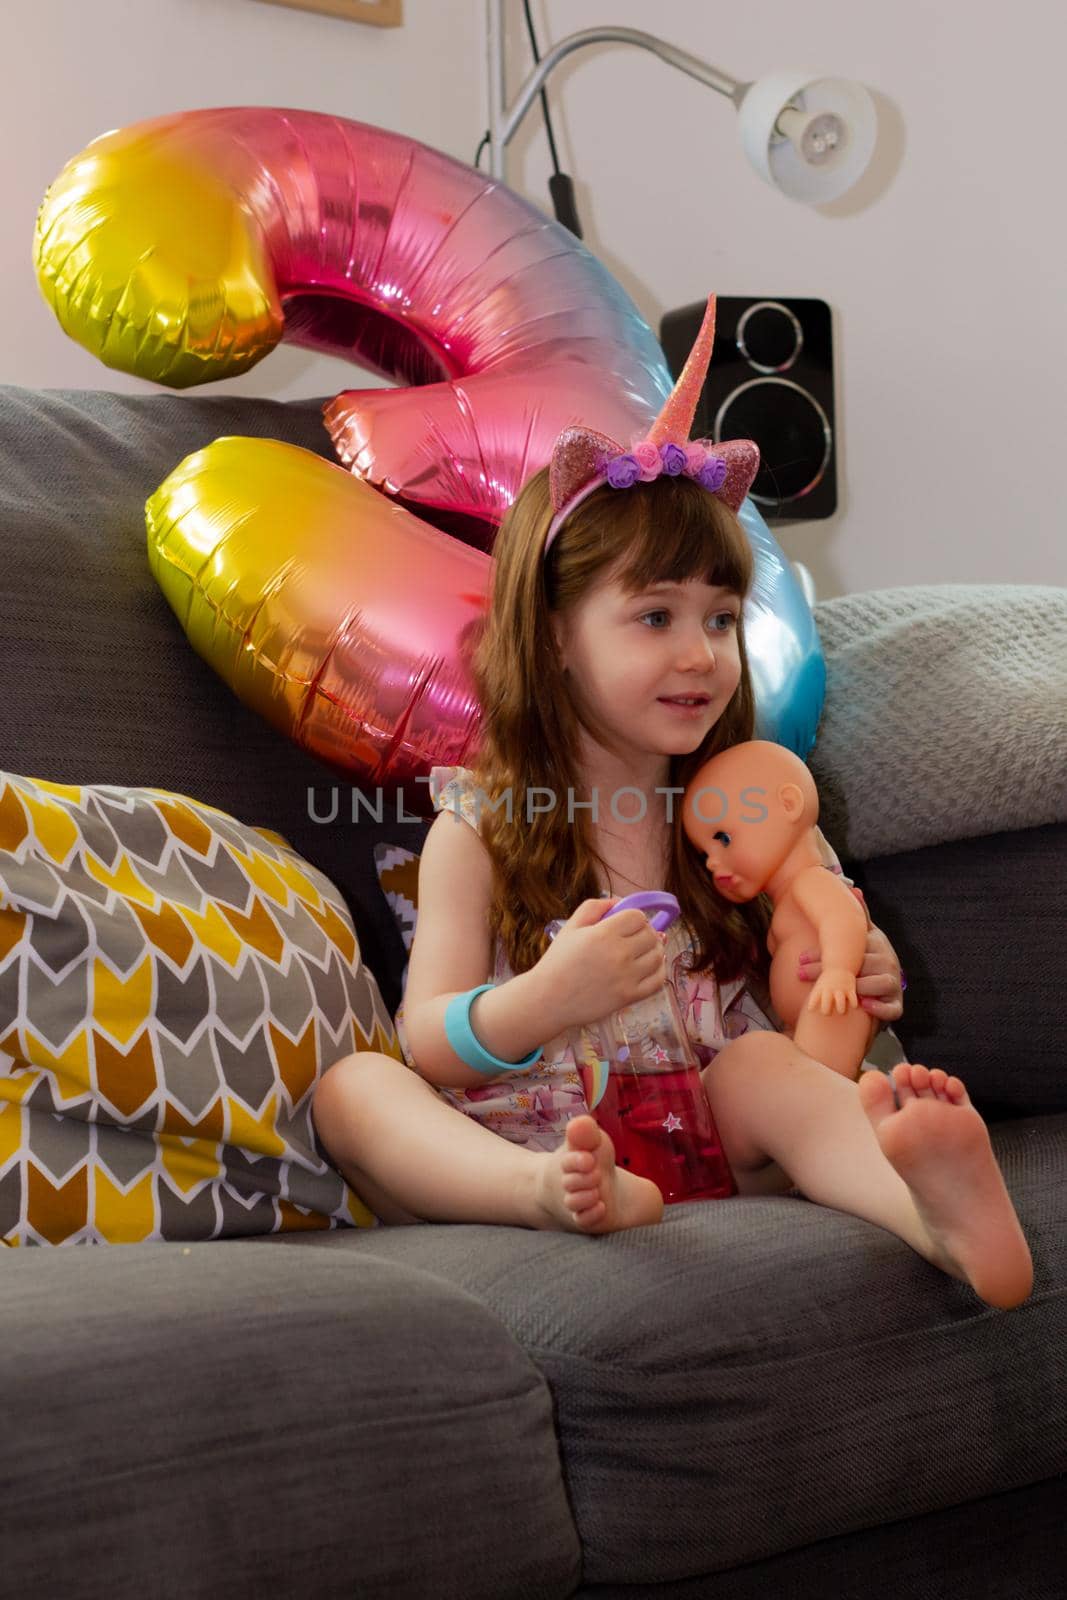 A Cute Baby Girl Sitting On A Sofa With A Colourful Balloon And A Doll by AlbertoPascual